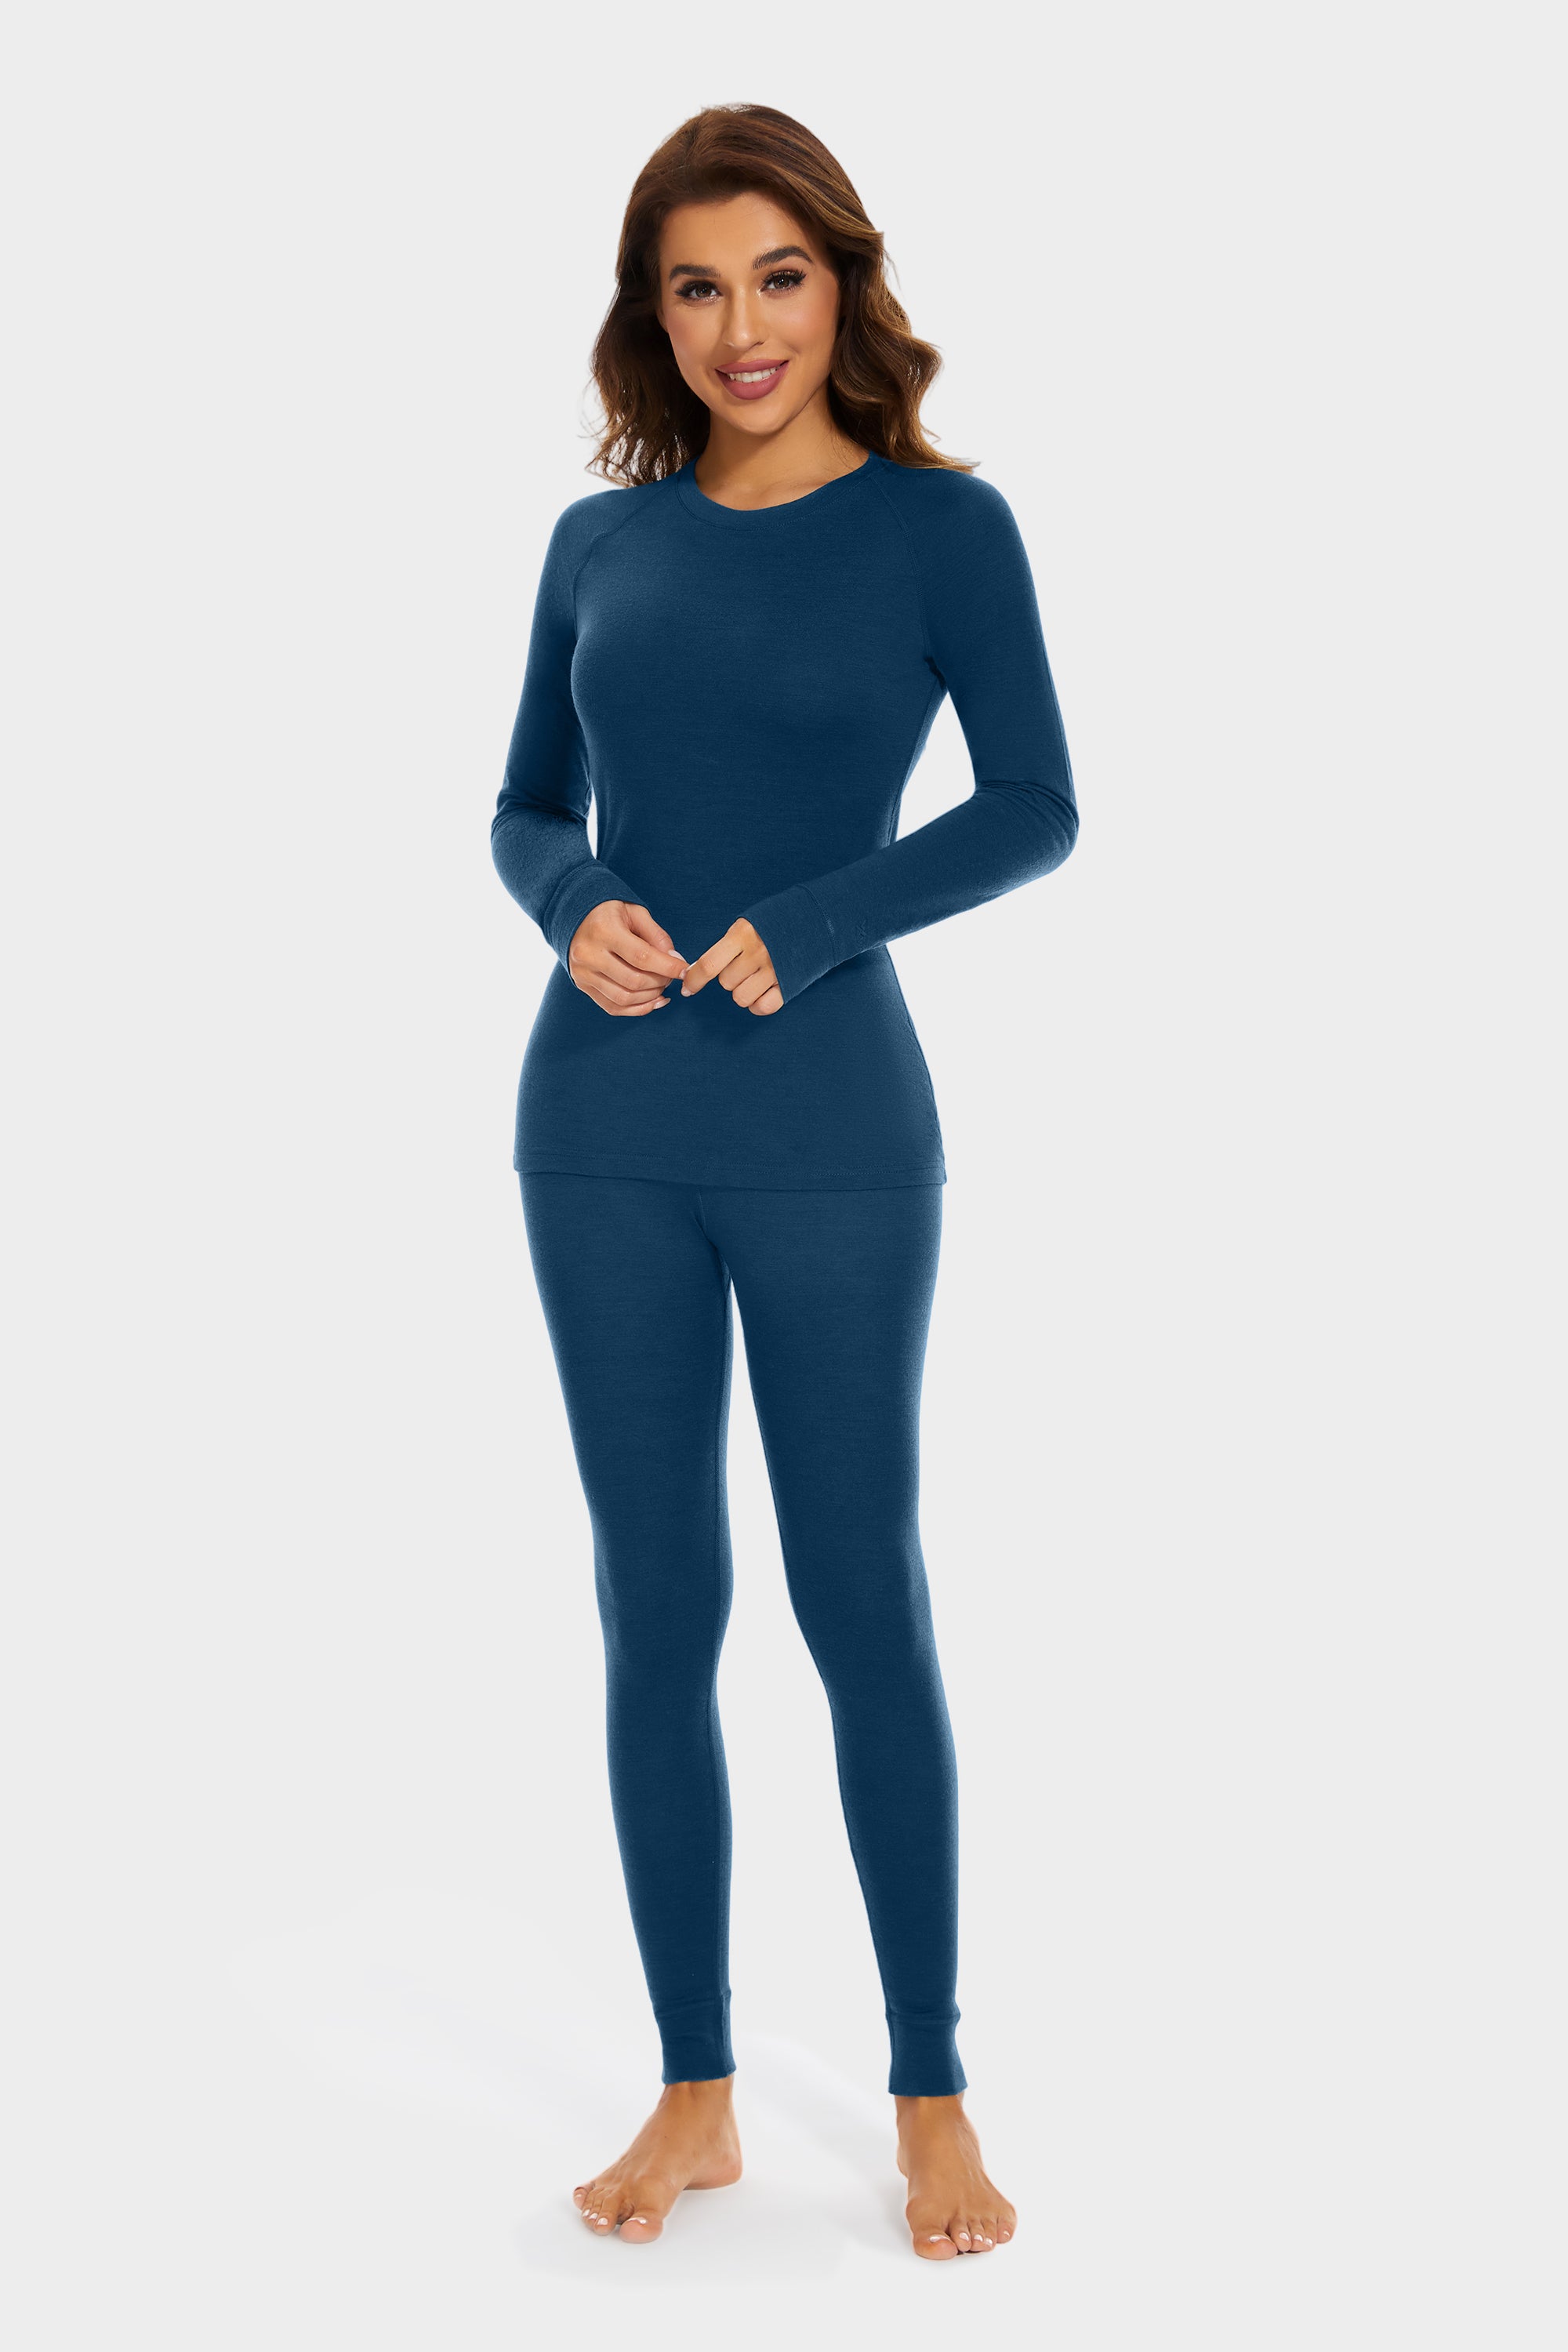 Woolx - 100% Merino Wool Clothing and Base Layer - 100% merino wool thermal  bottoms for women - So soft and warm! Th…